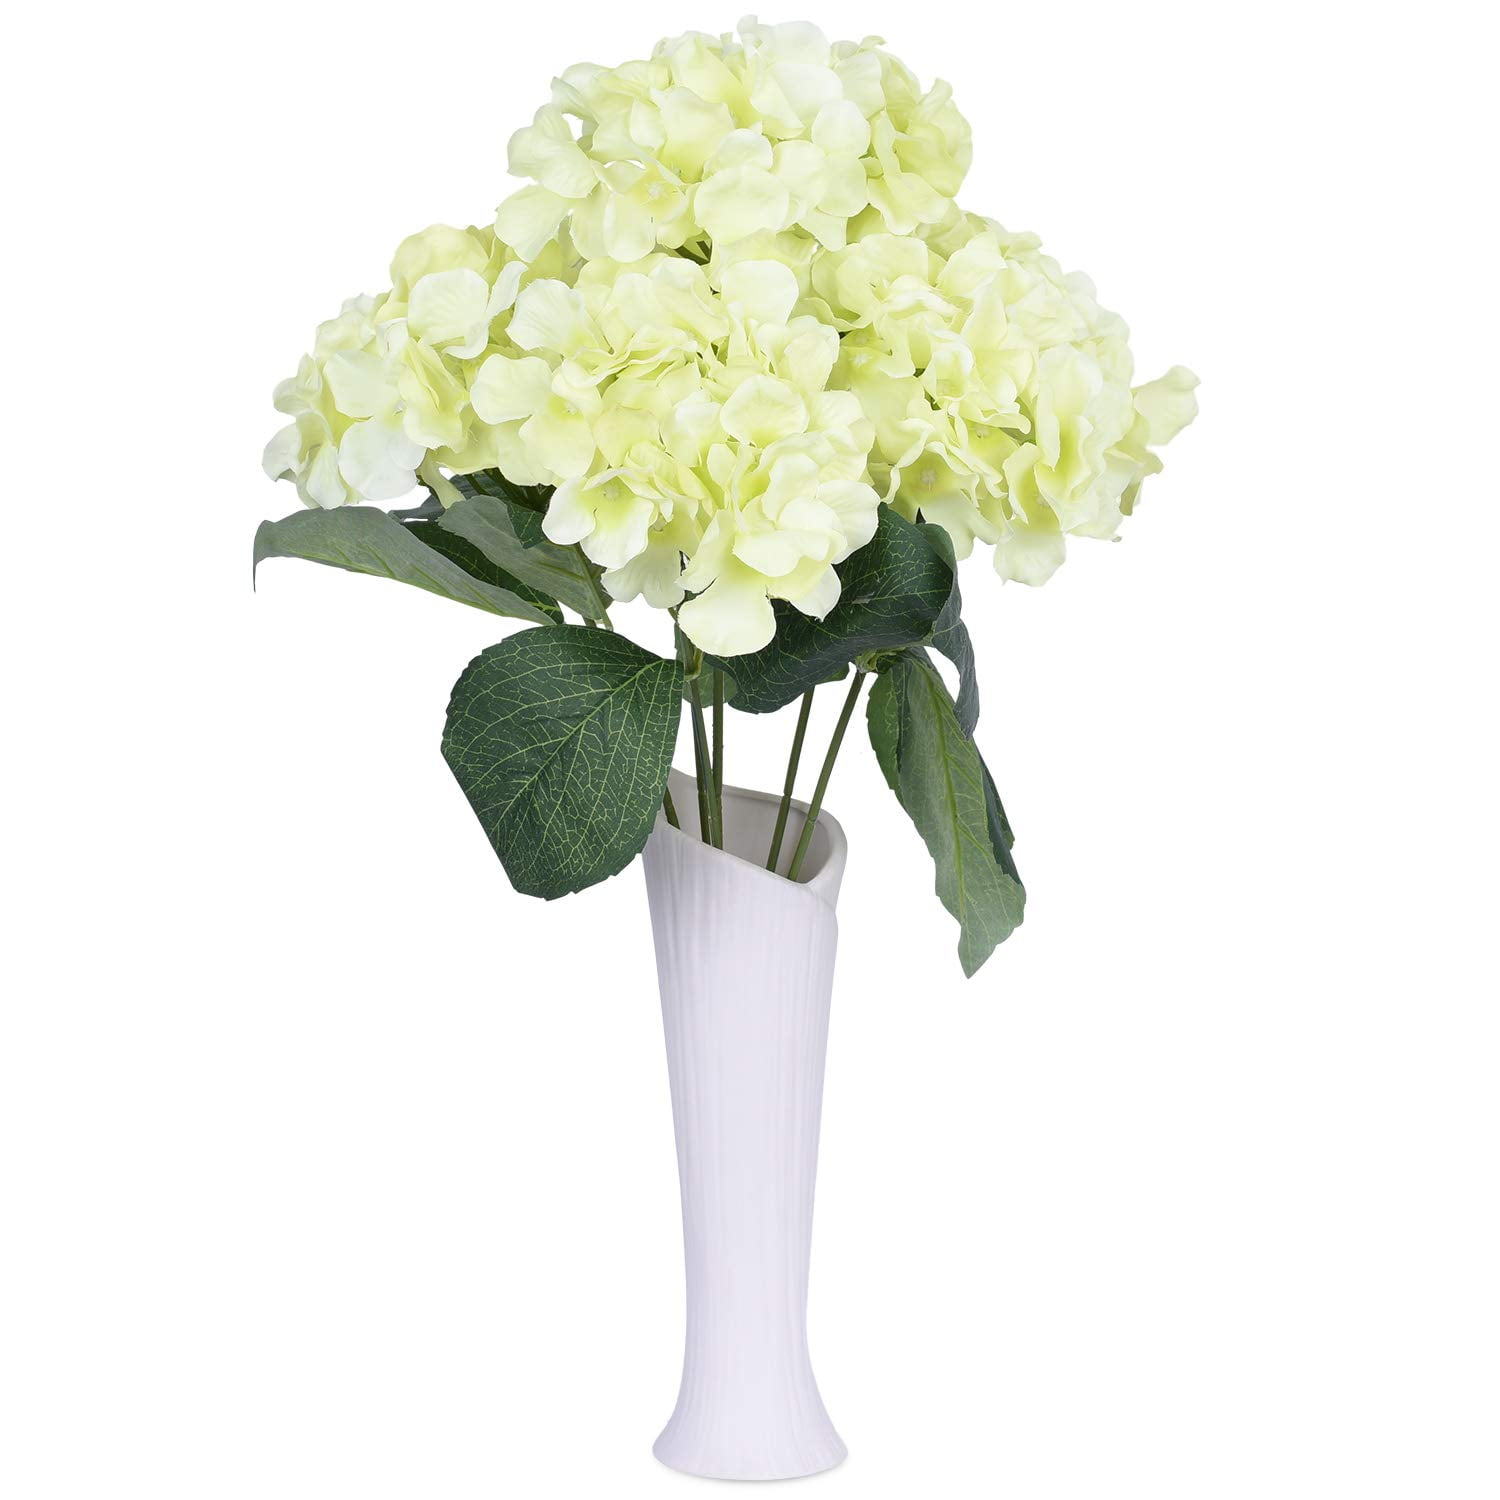 CTFIVING Artificial Flowers Artificial Hydrangea Bouquet with Small Vase Silk Flower for Table Party Office Wedding Home Decor Green